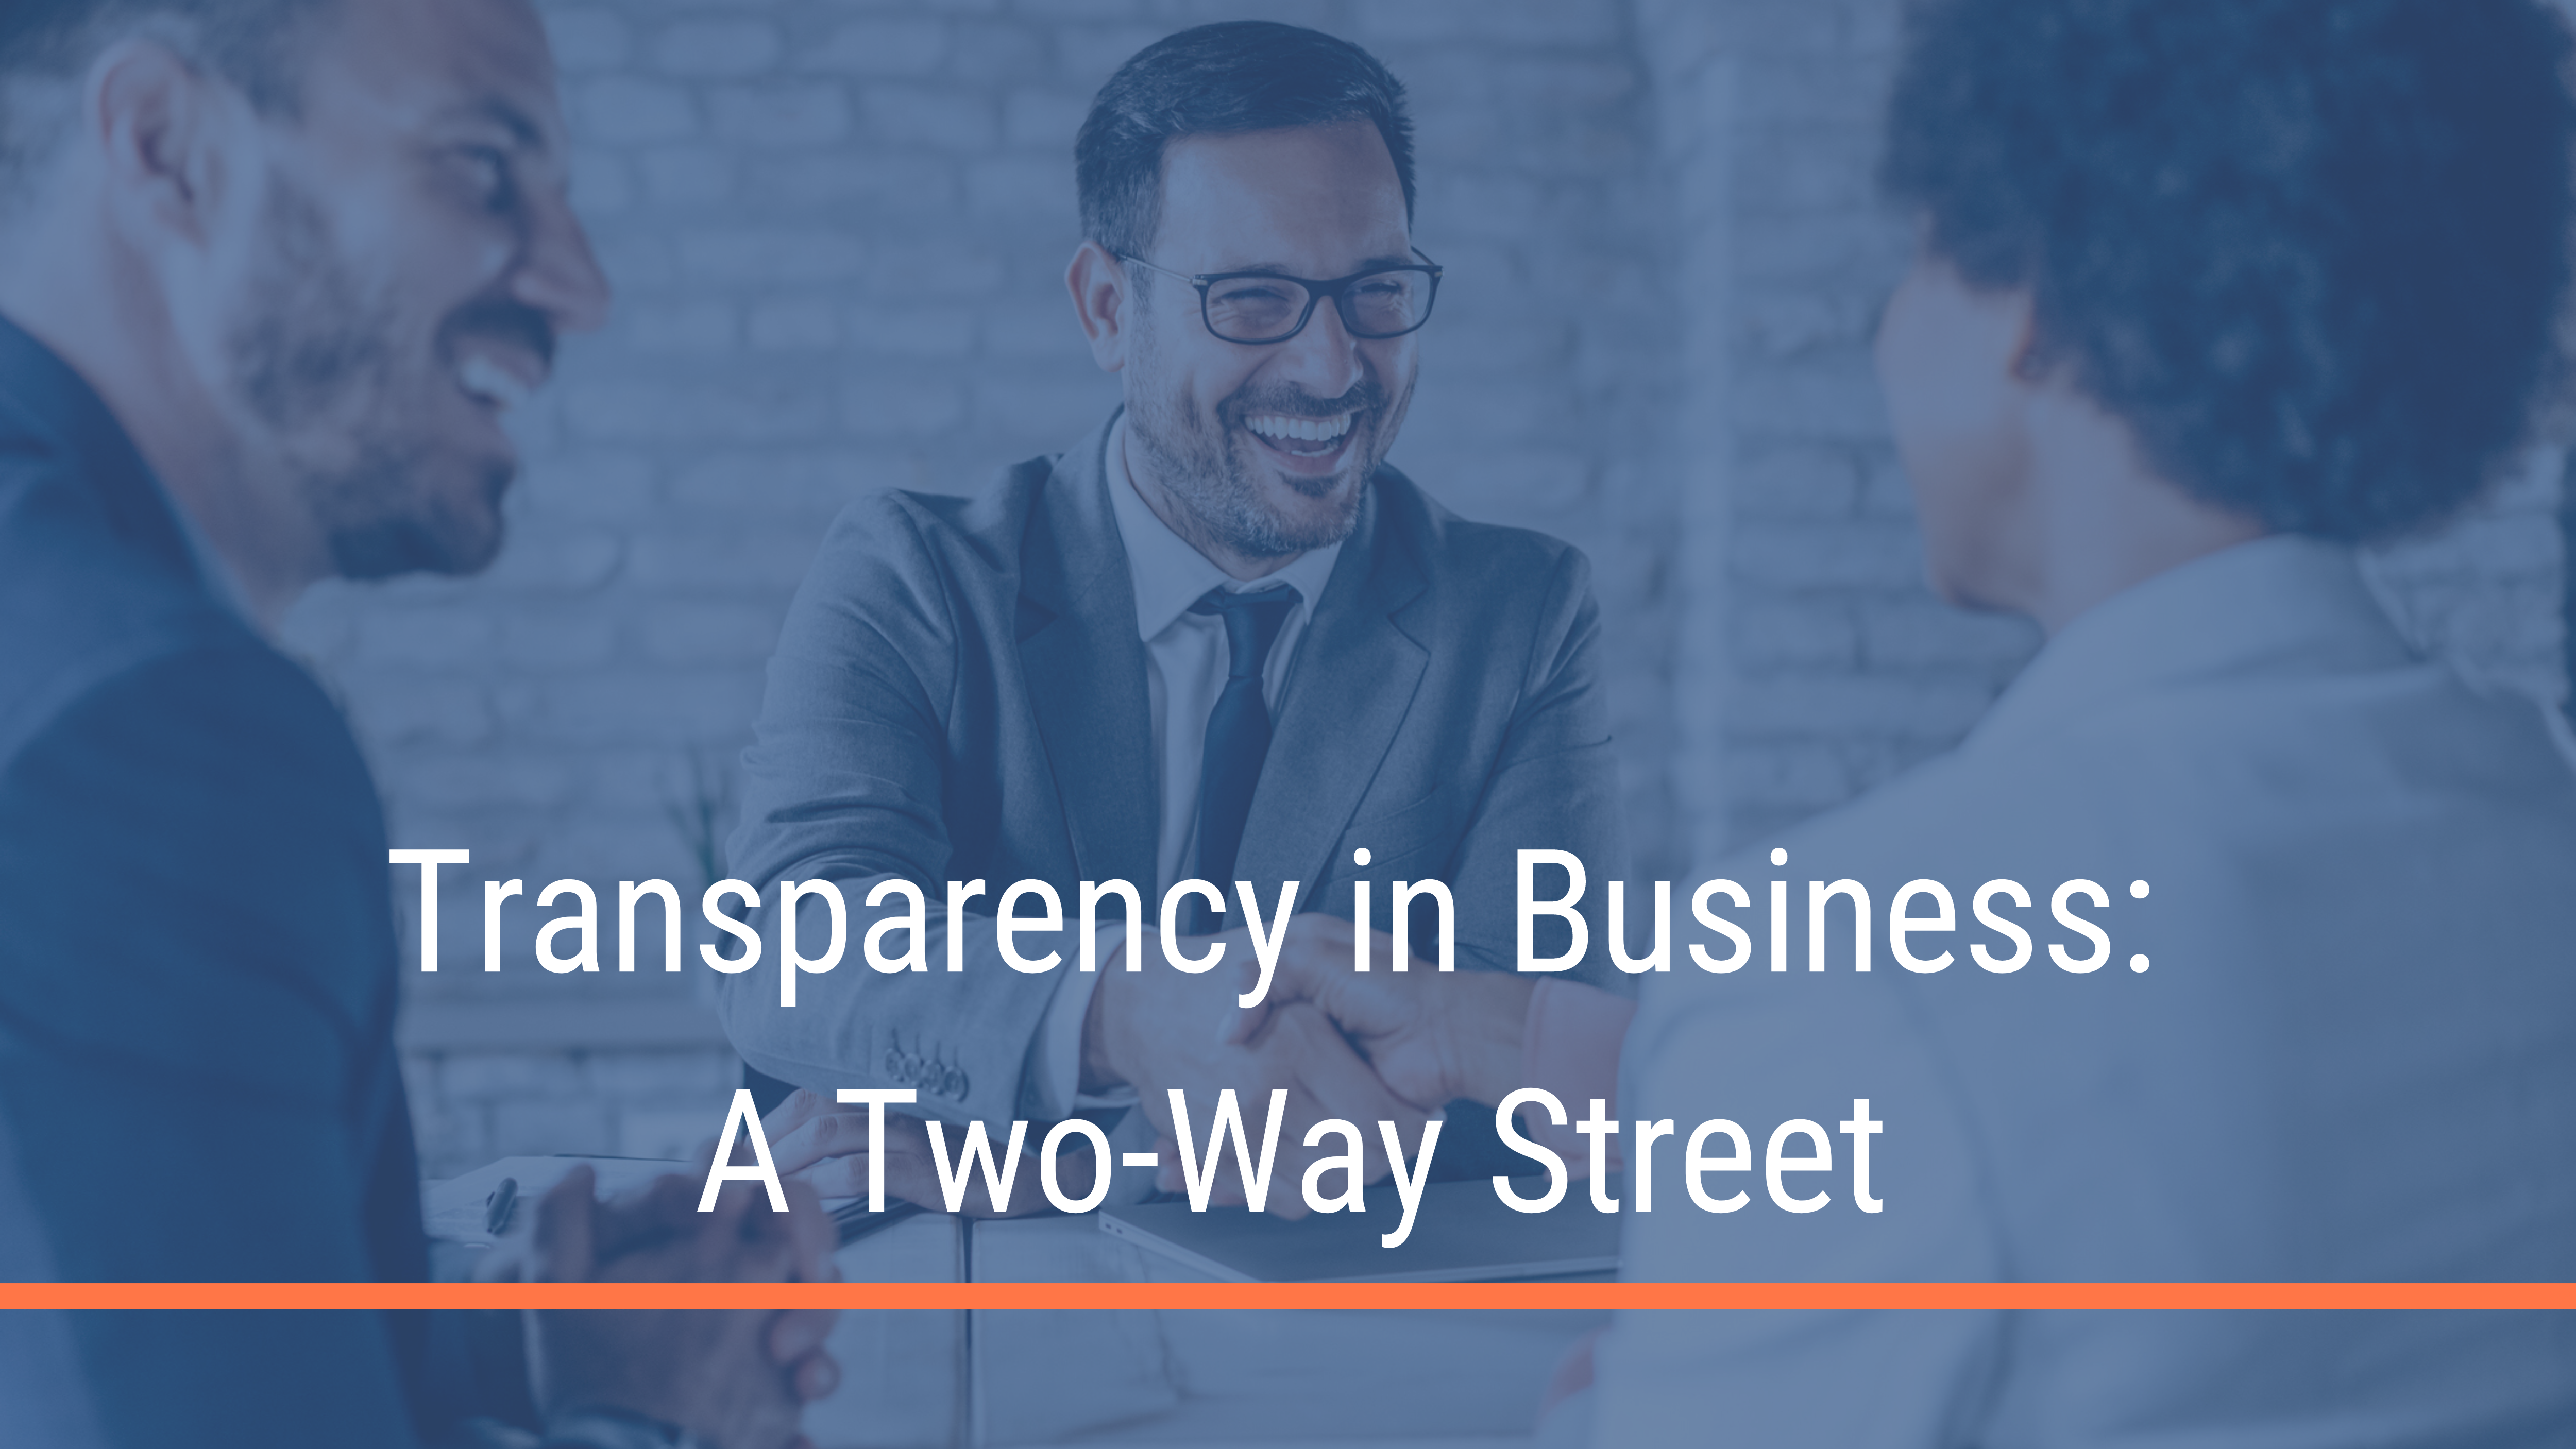 Transparency in Business:
A Two-Way Street